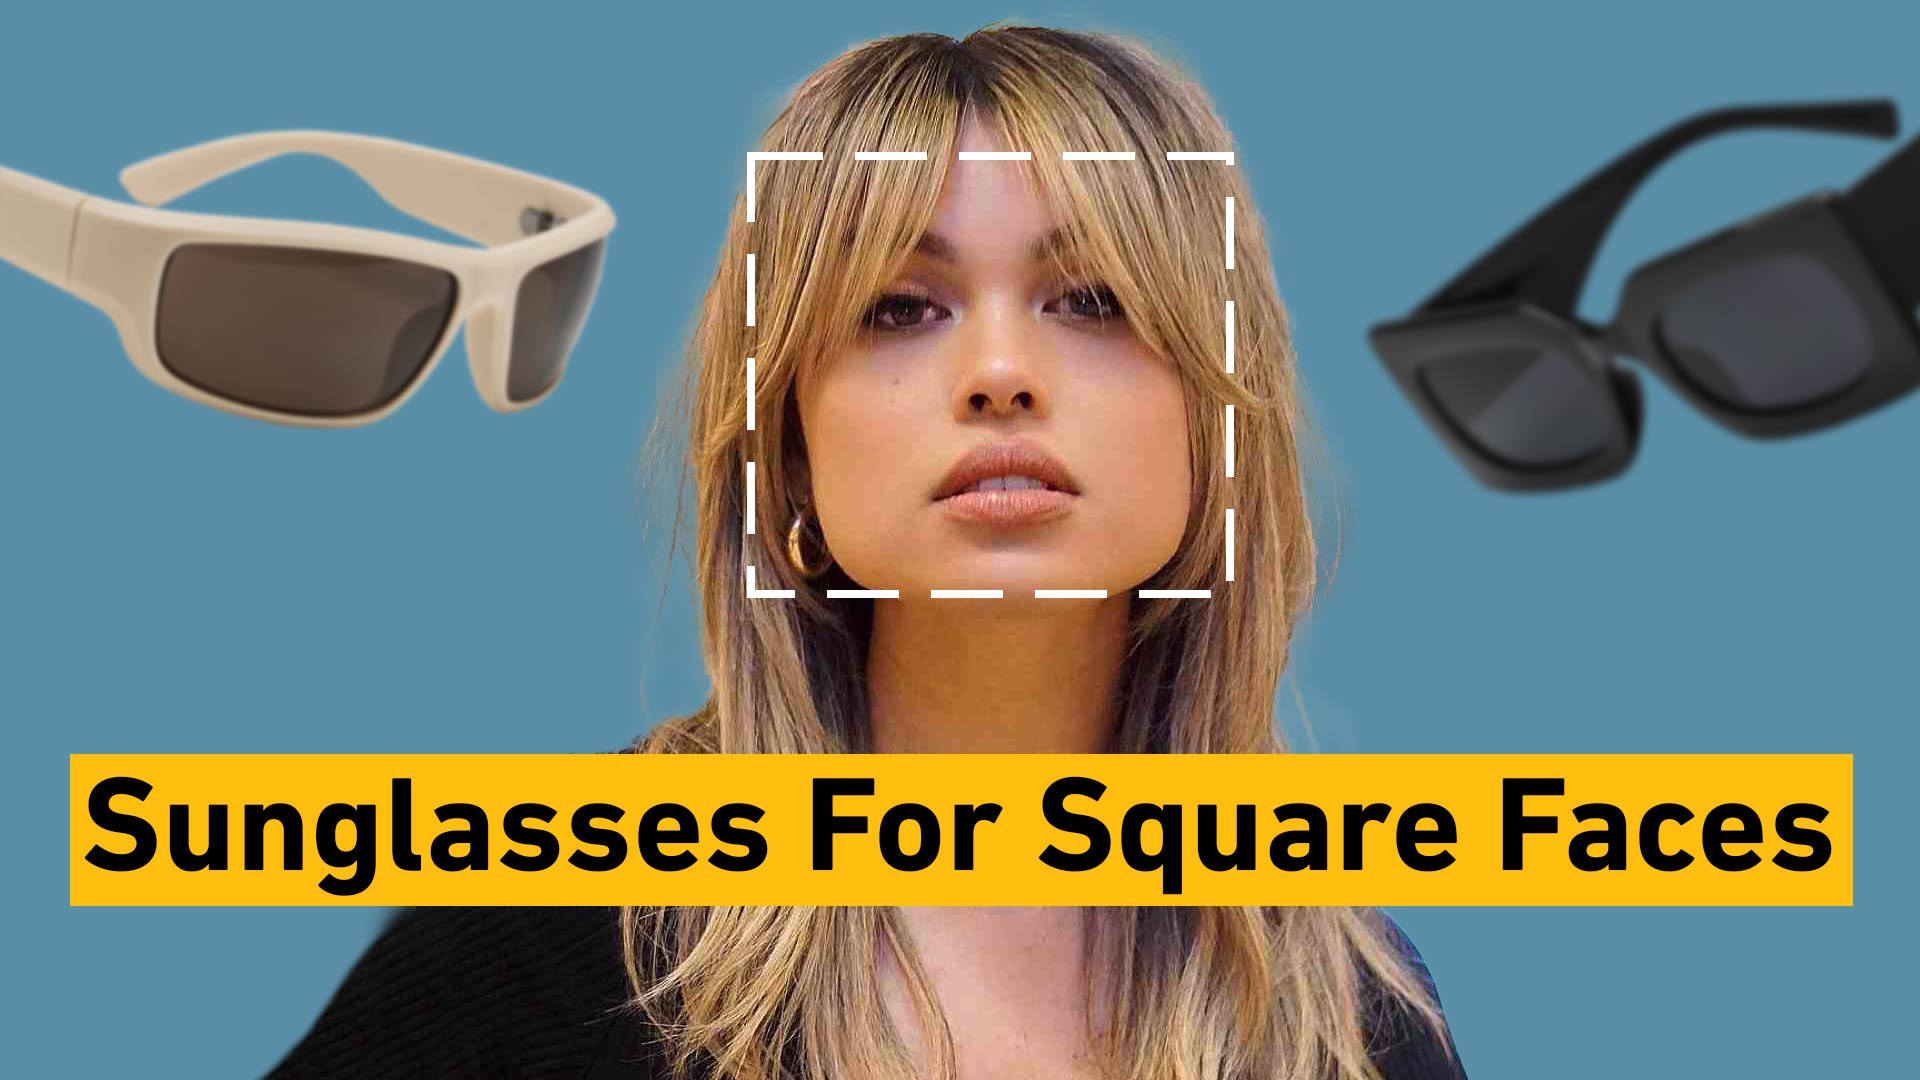 The Best Sunglasses for Square Faces